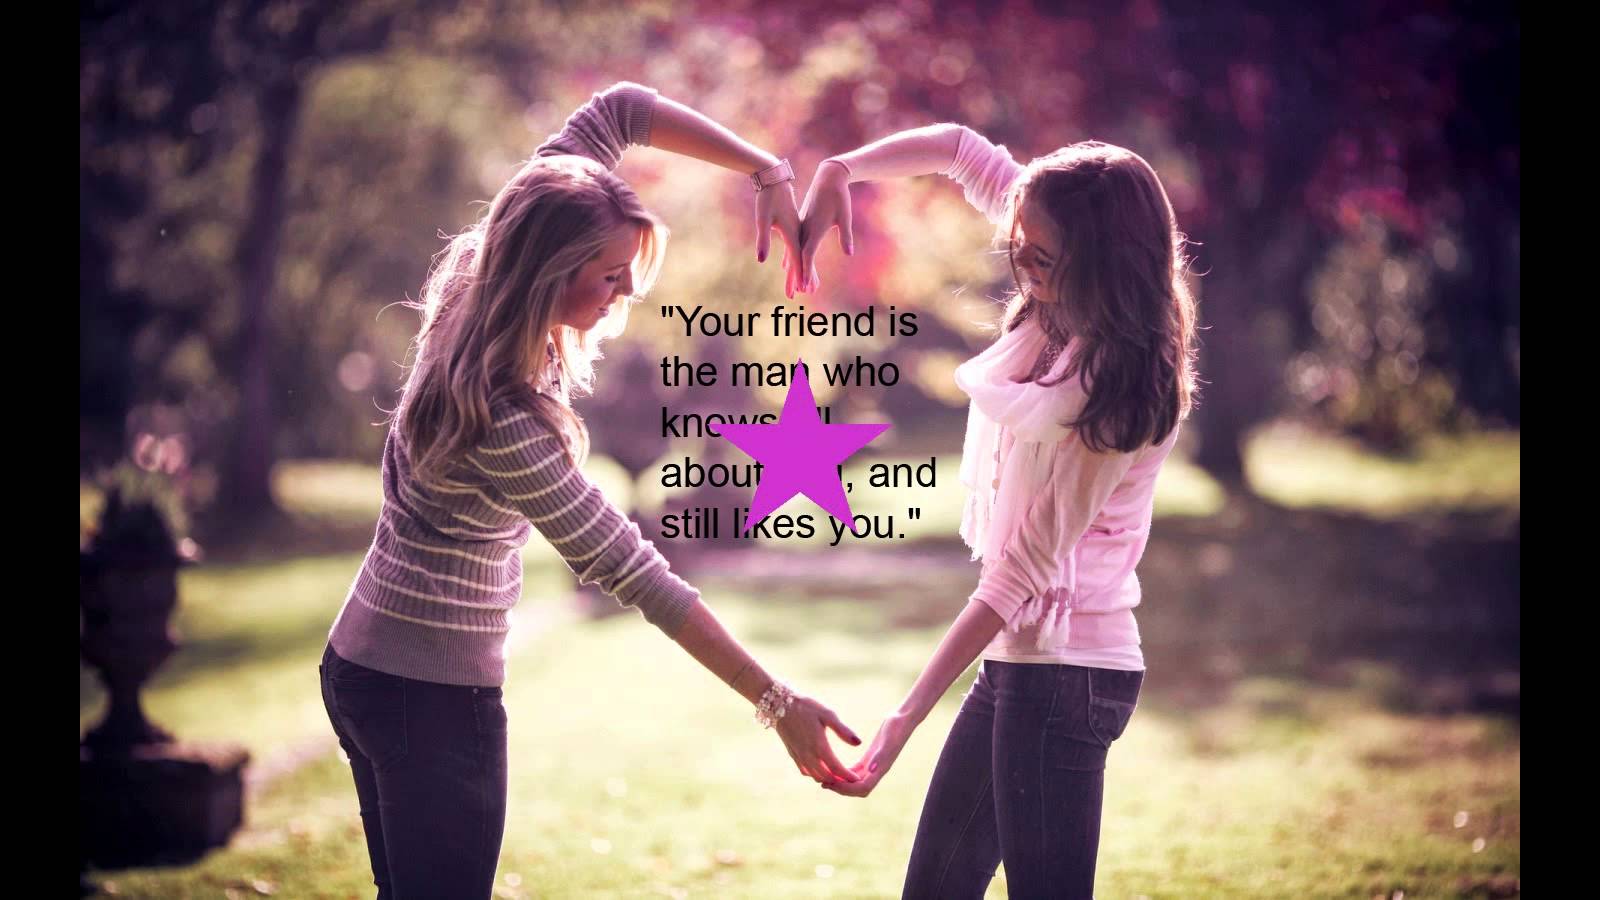 Download Friendship day 2013 wallpaper image